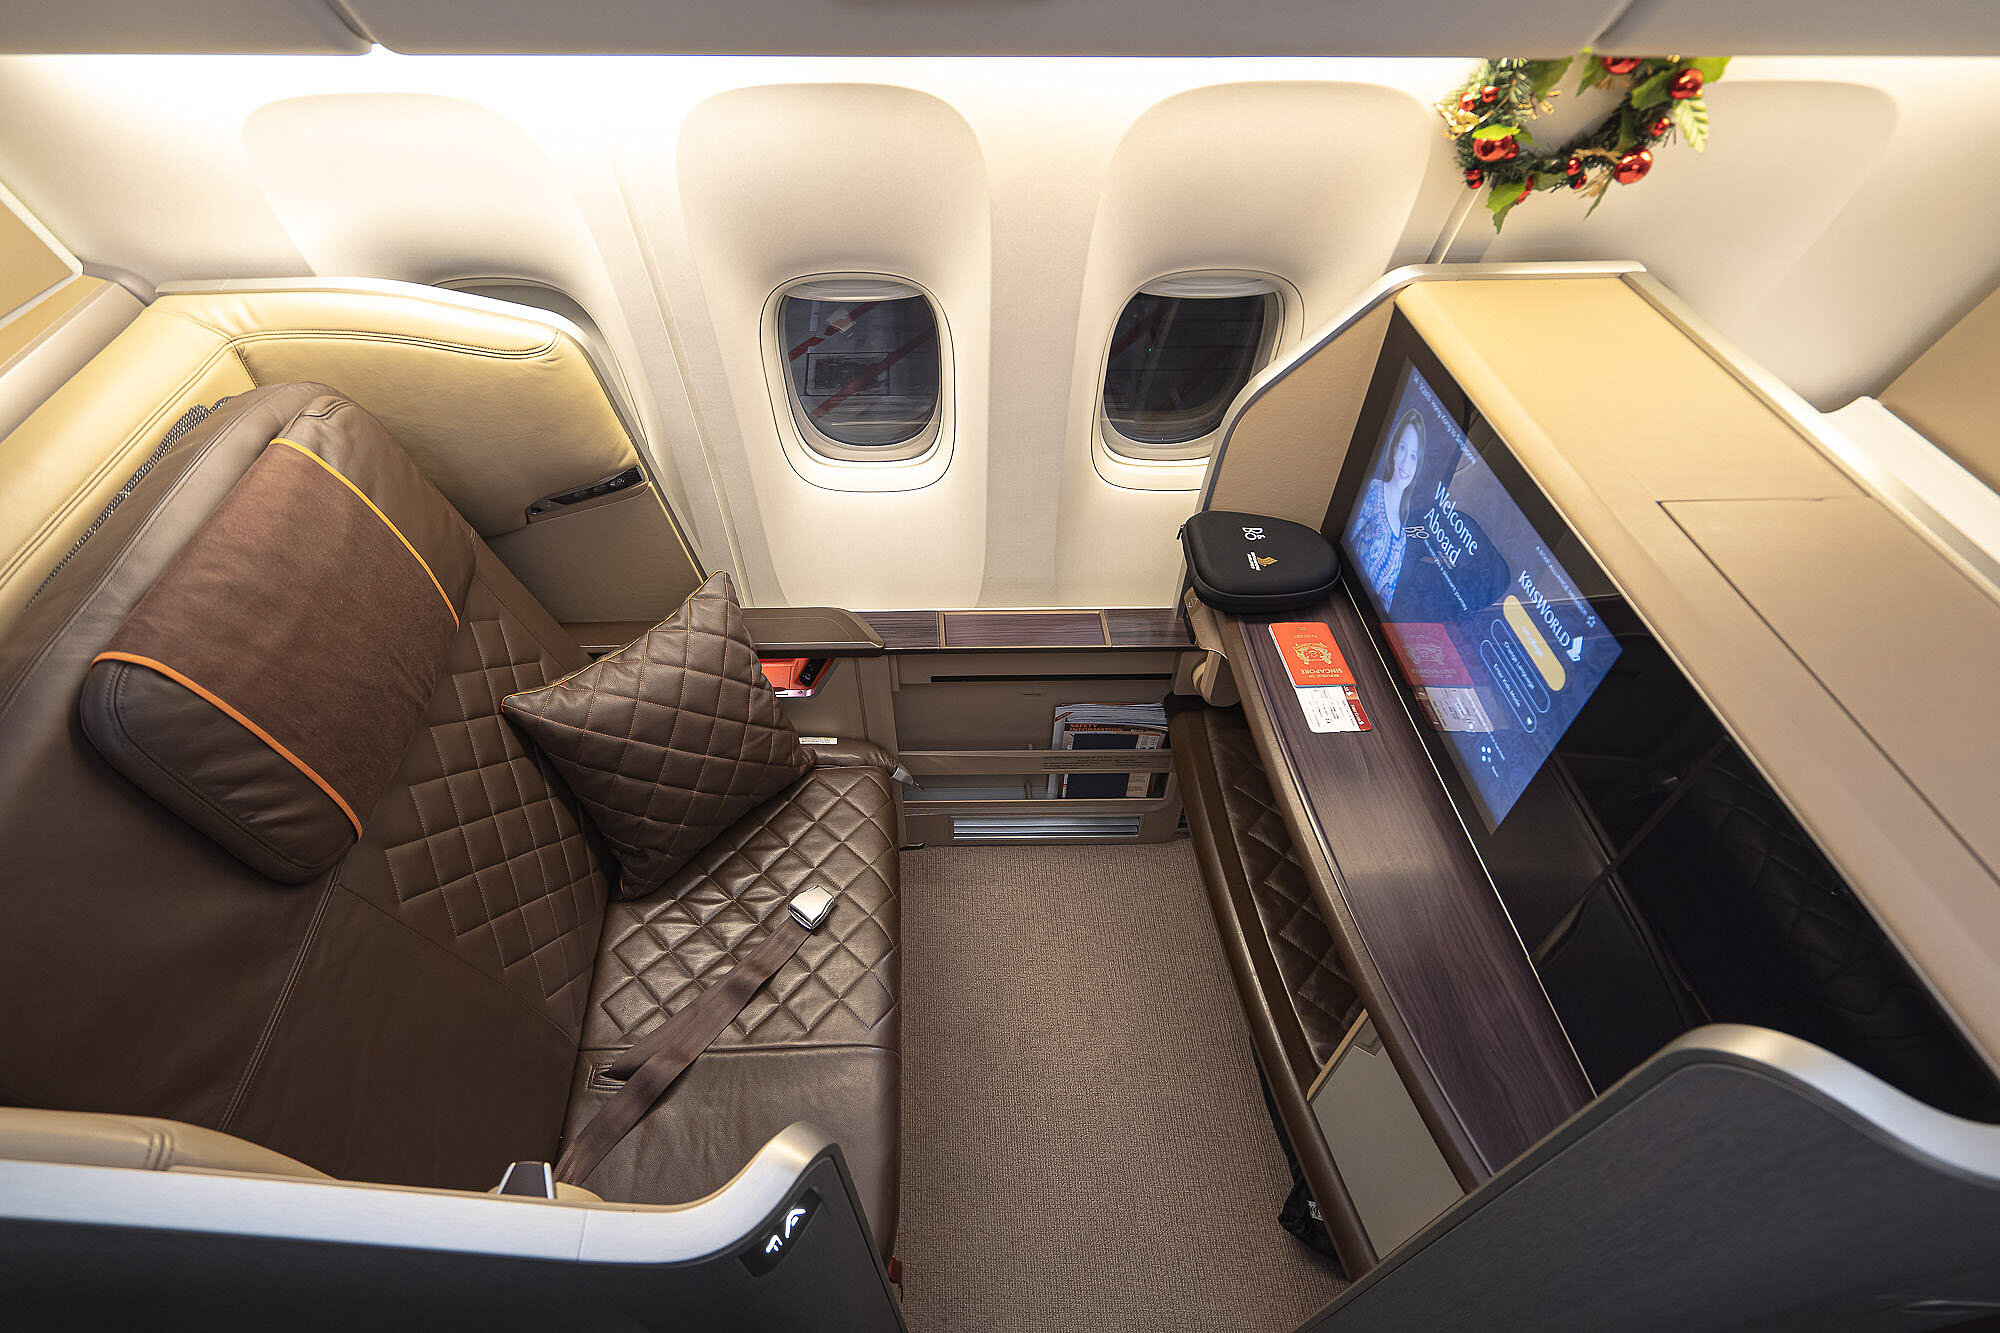 Singapore Airlines 2013 First Class seat